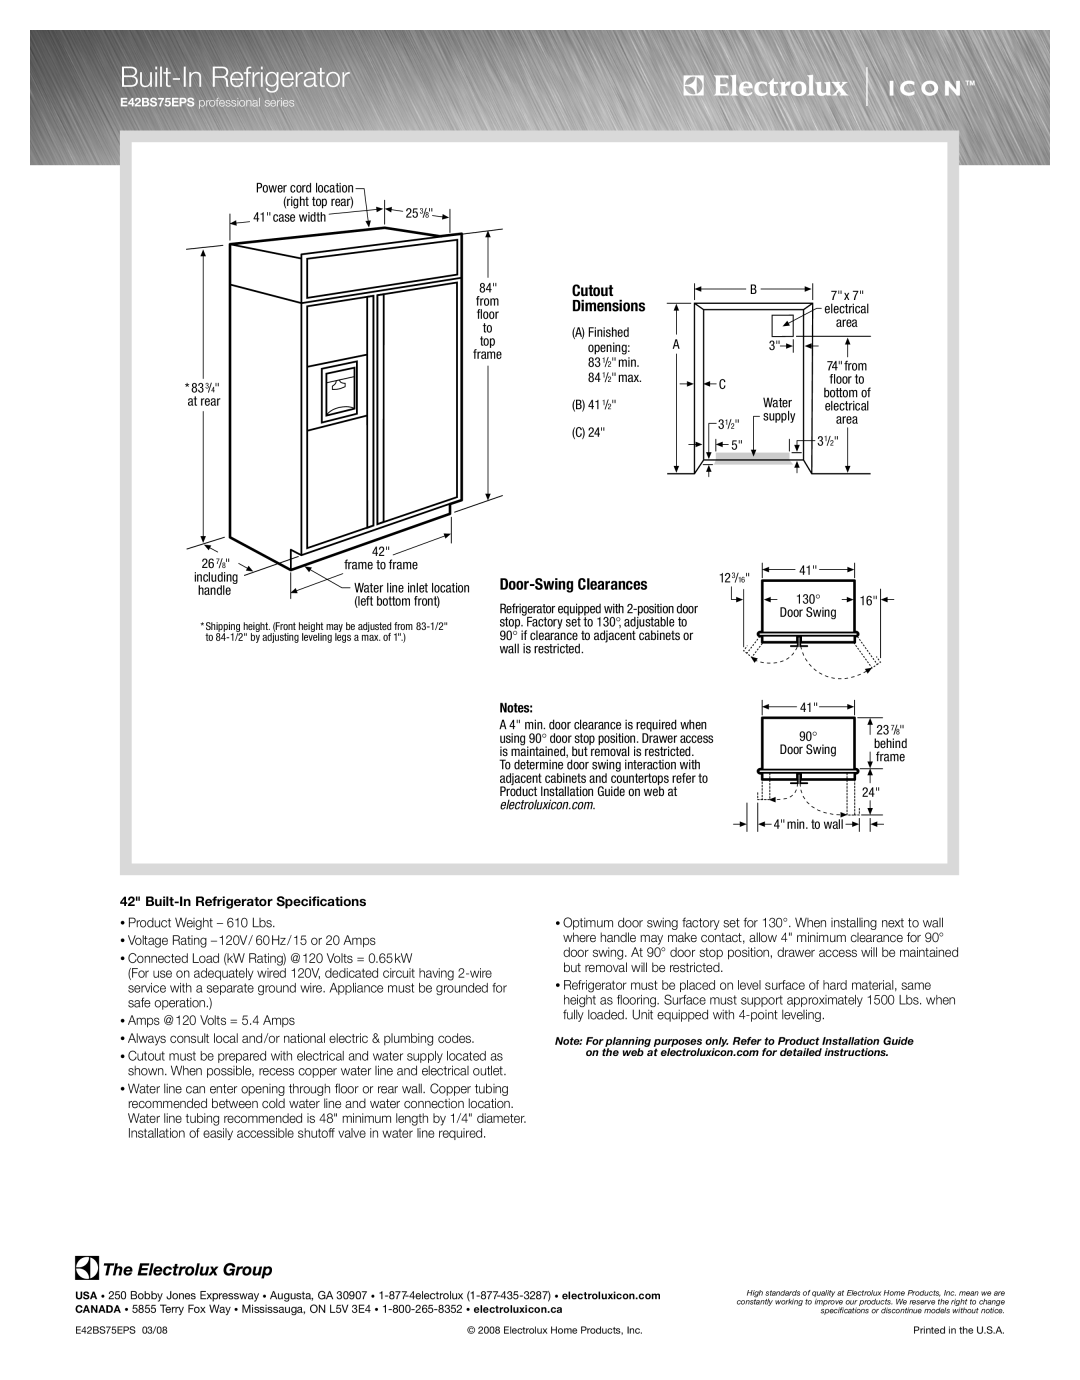 Electrolux E42BS75EPS Built-In Refrigerator Specifications, Cutout, Dimensions, Door-Swing Clearances, electroluxicon.com 